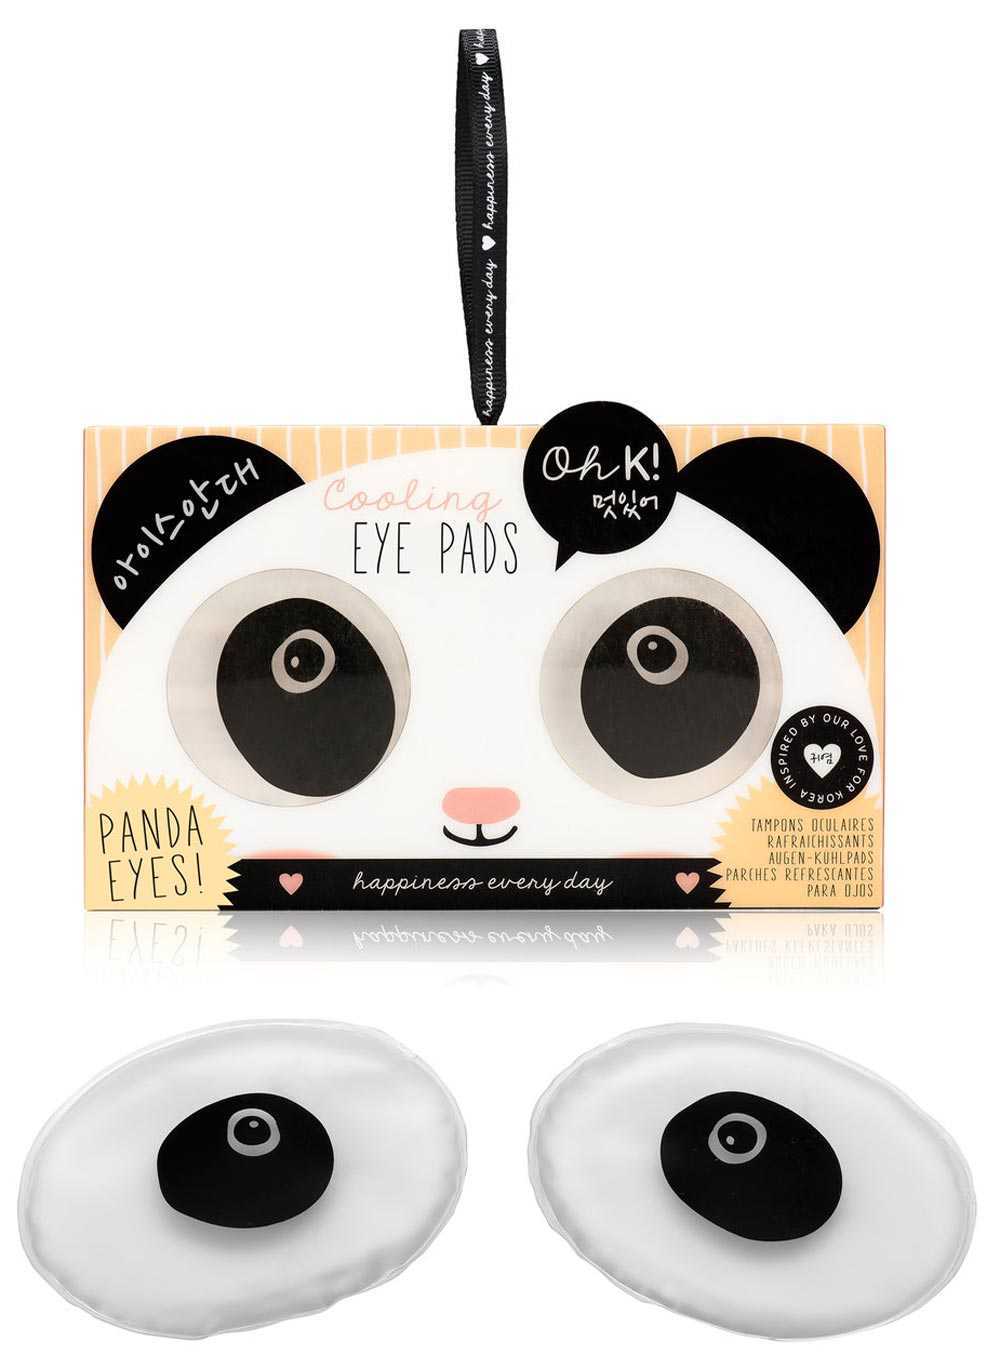 Oh K! Cooling Eye Pads 